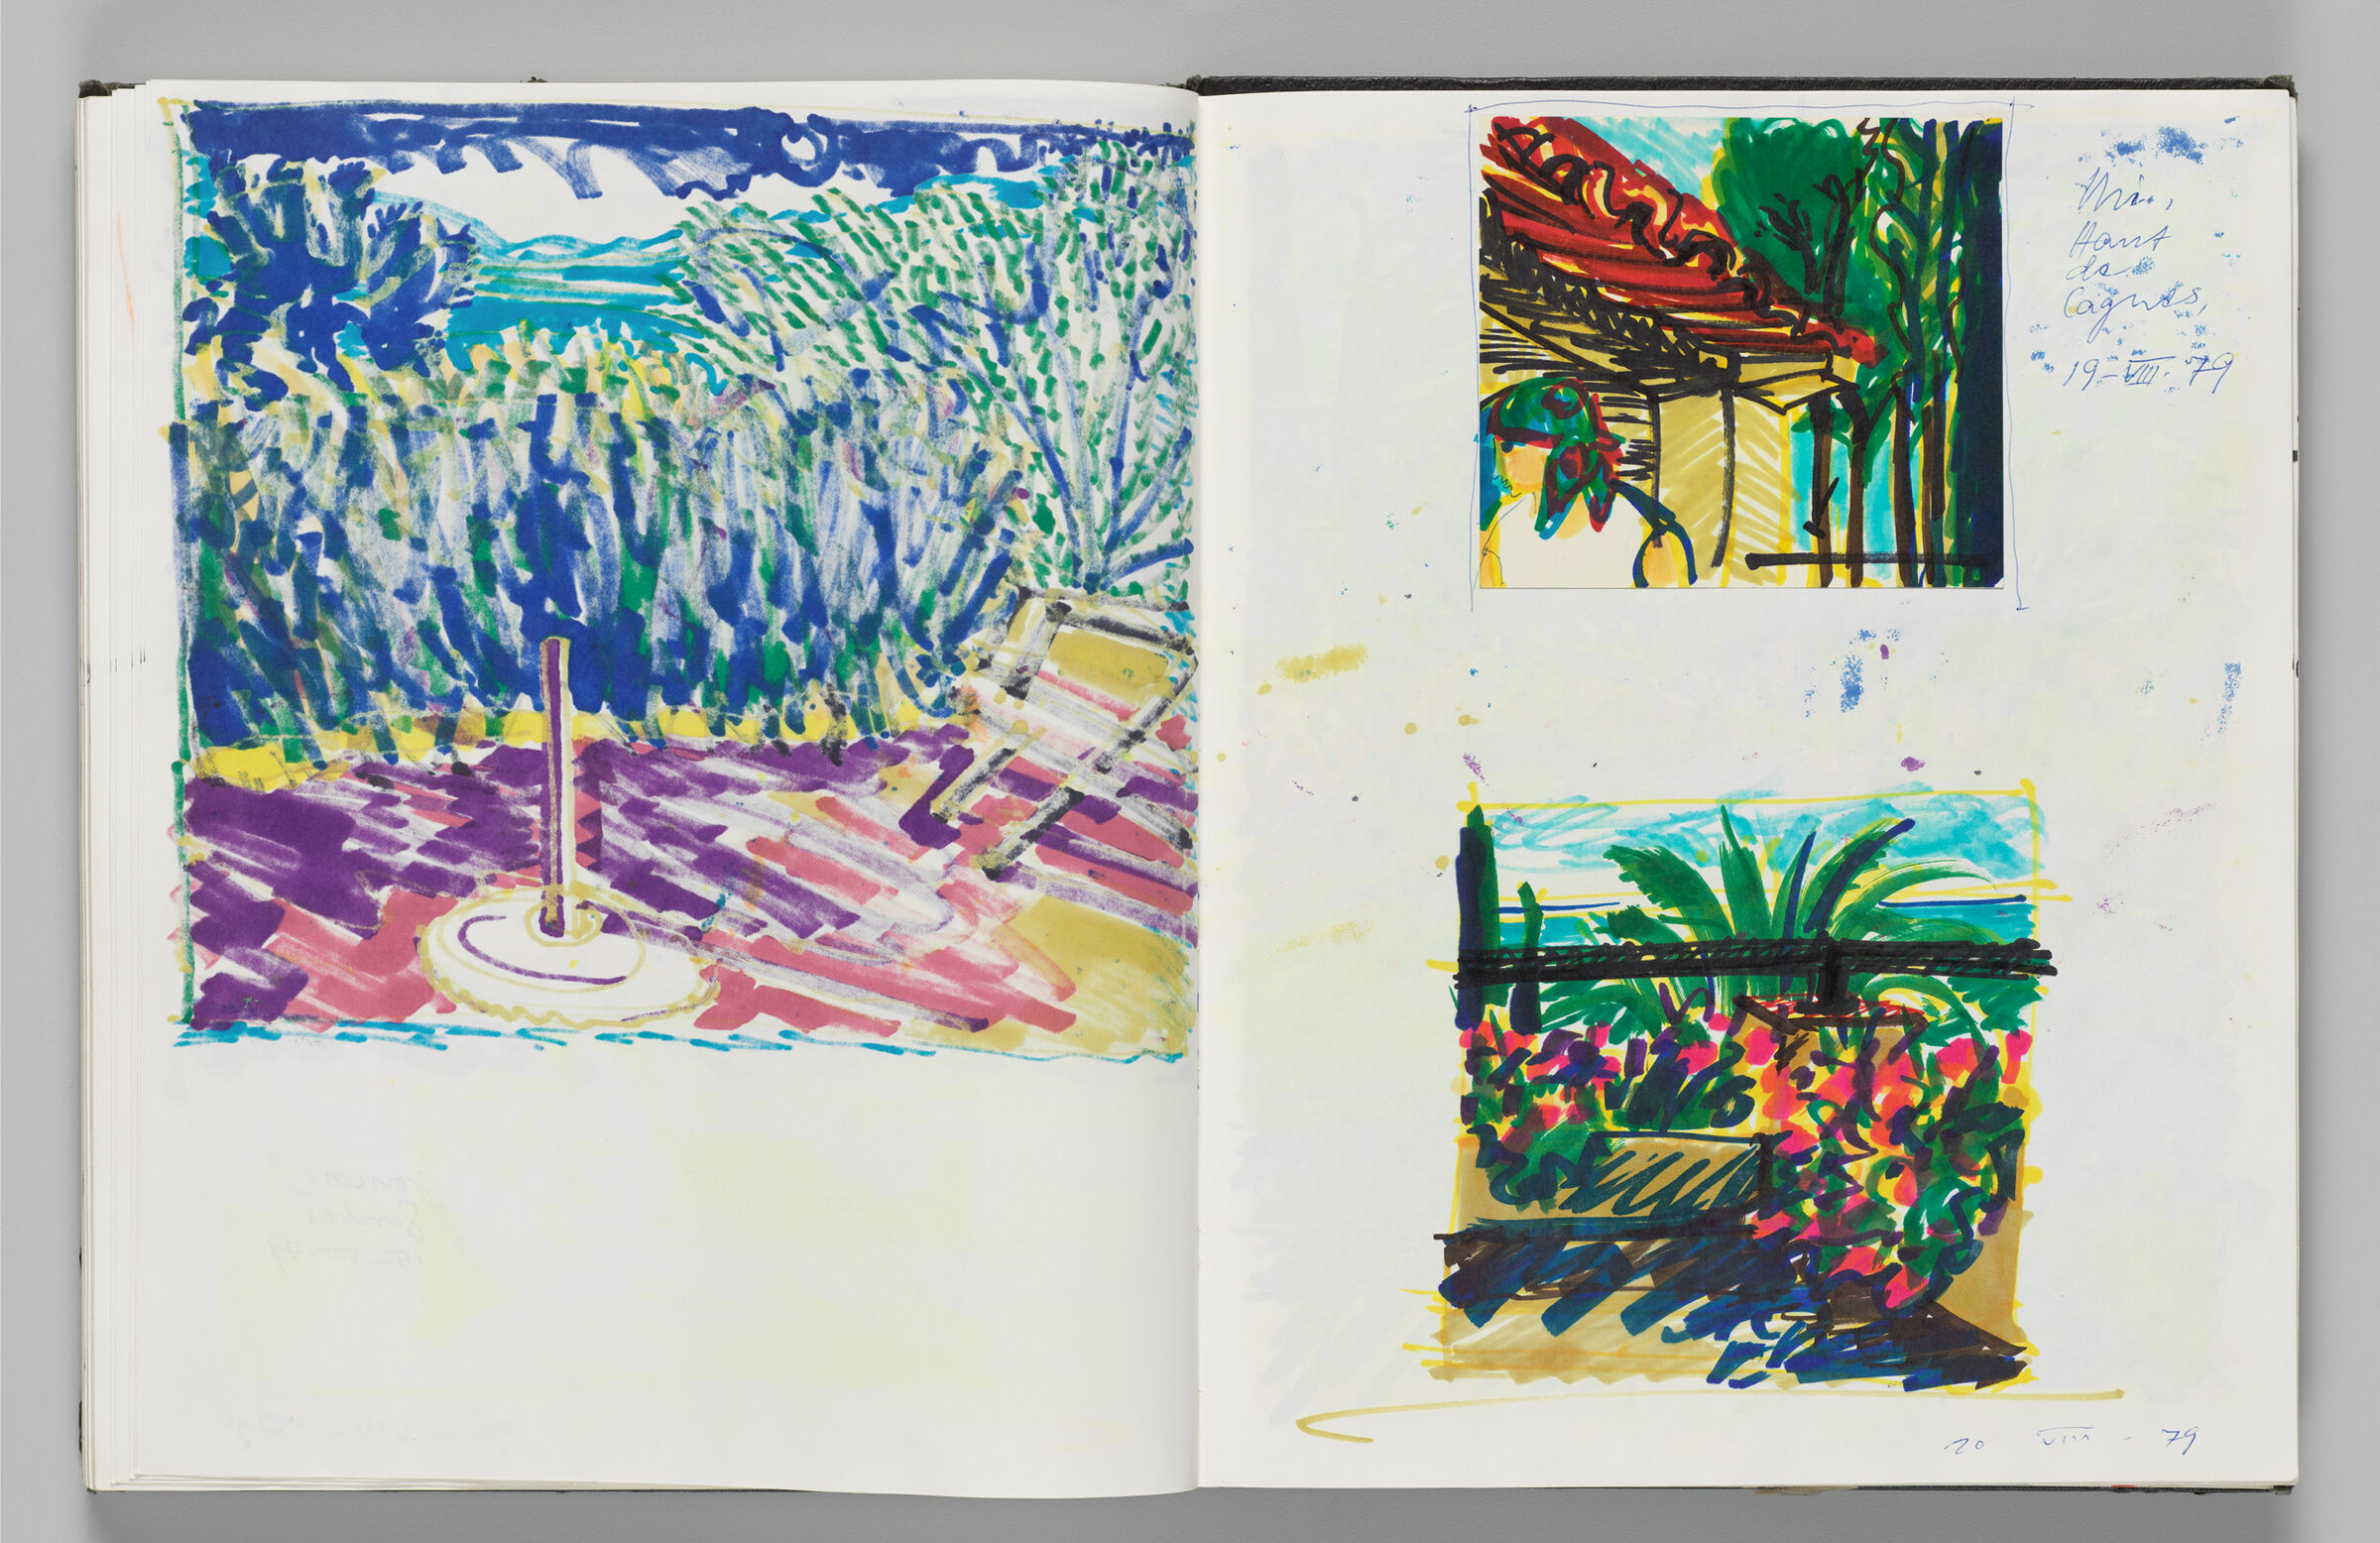 Untitled (Bleed-Through Of Previous Page, Left Page); Untitled (Adhered Sketch With Landscape, Right Page)